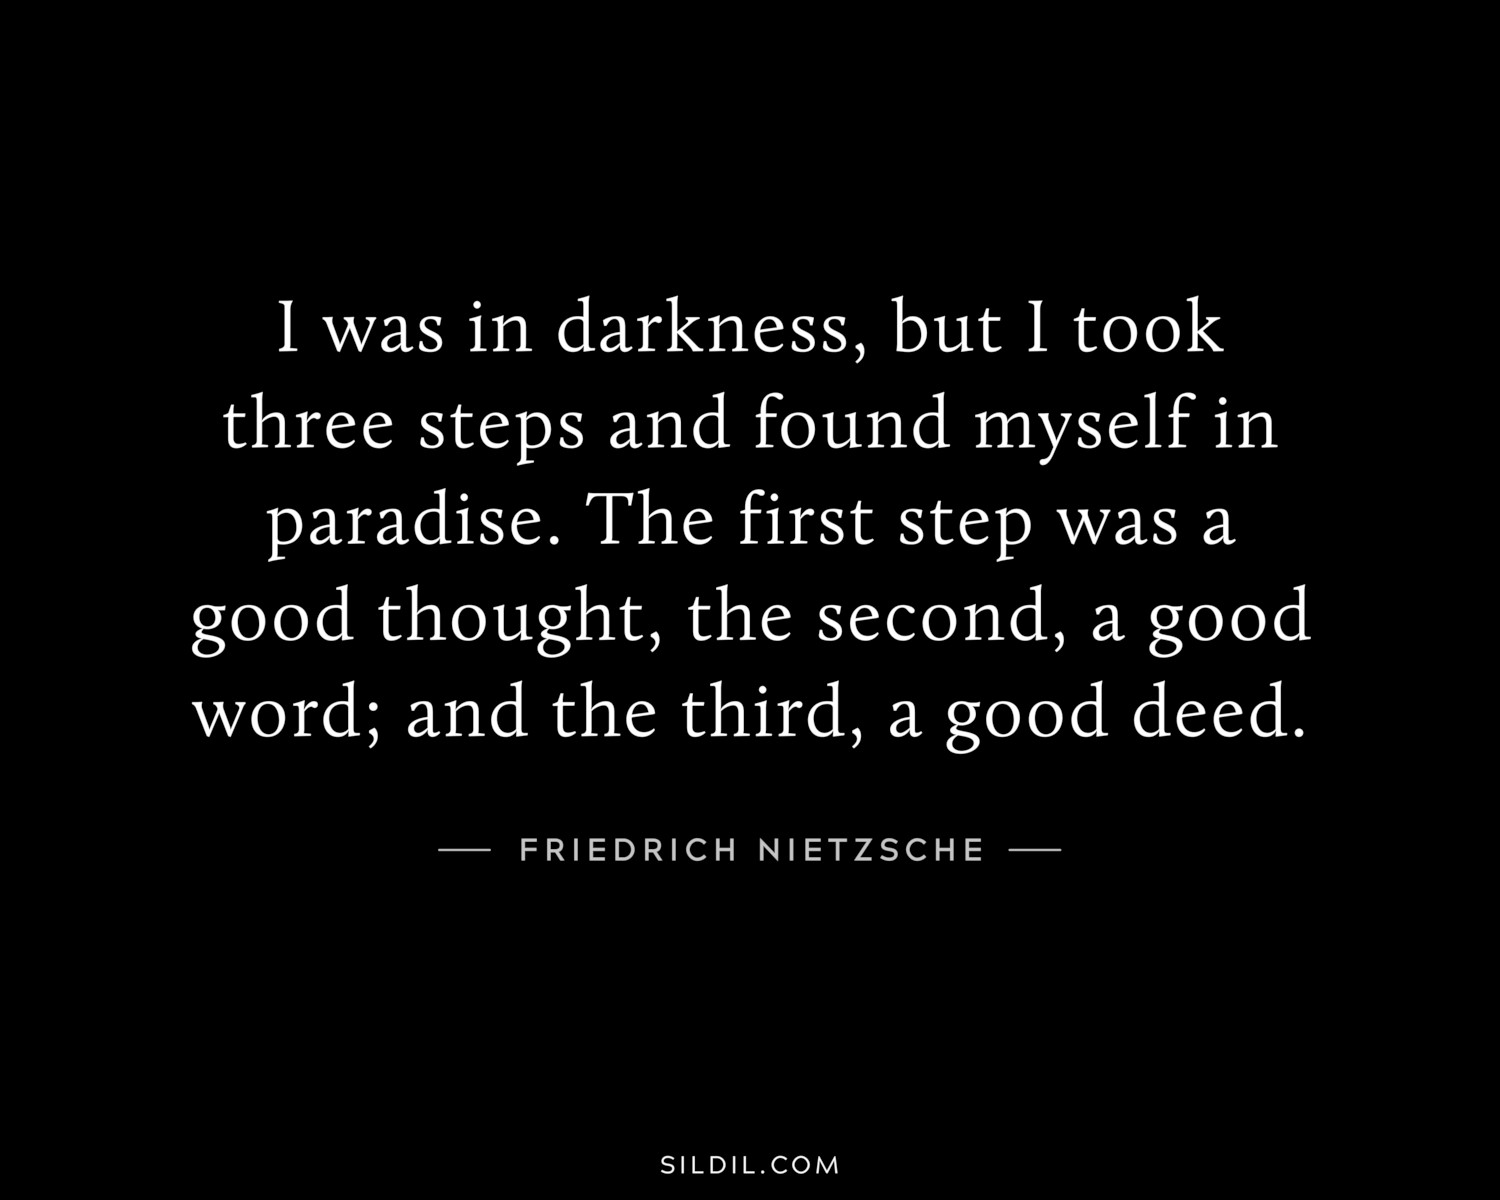 I was in darkness, but I took three steps and found myself in paradise. The first step was a good thought, the second, a good word; and the third, a good deed.